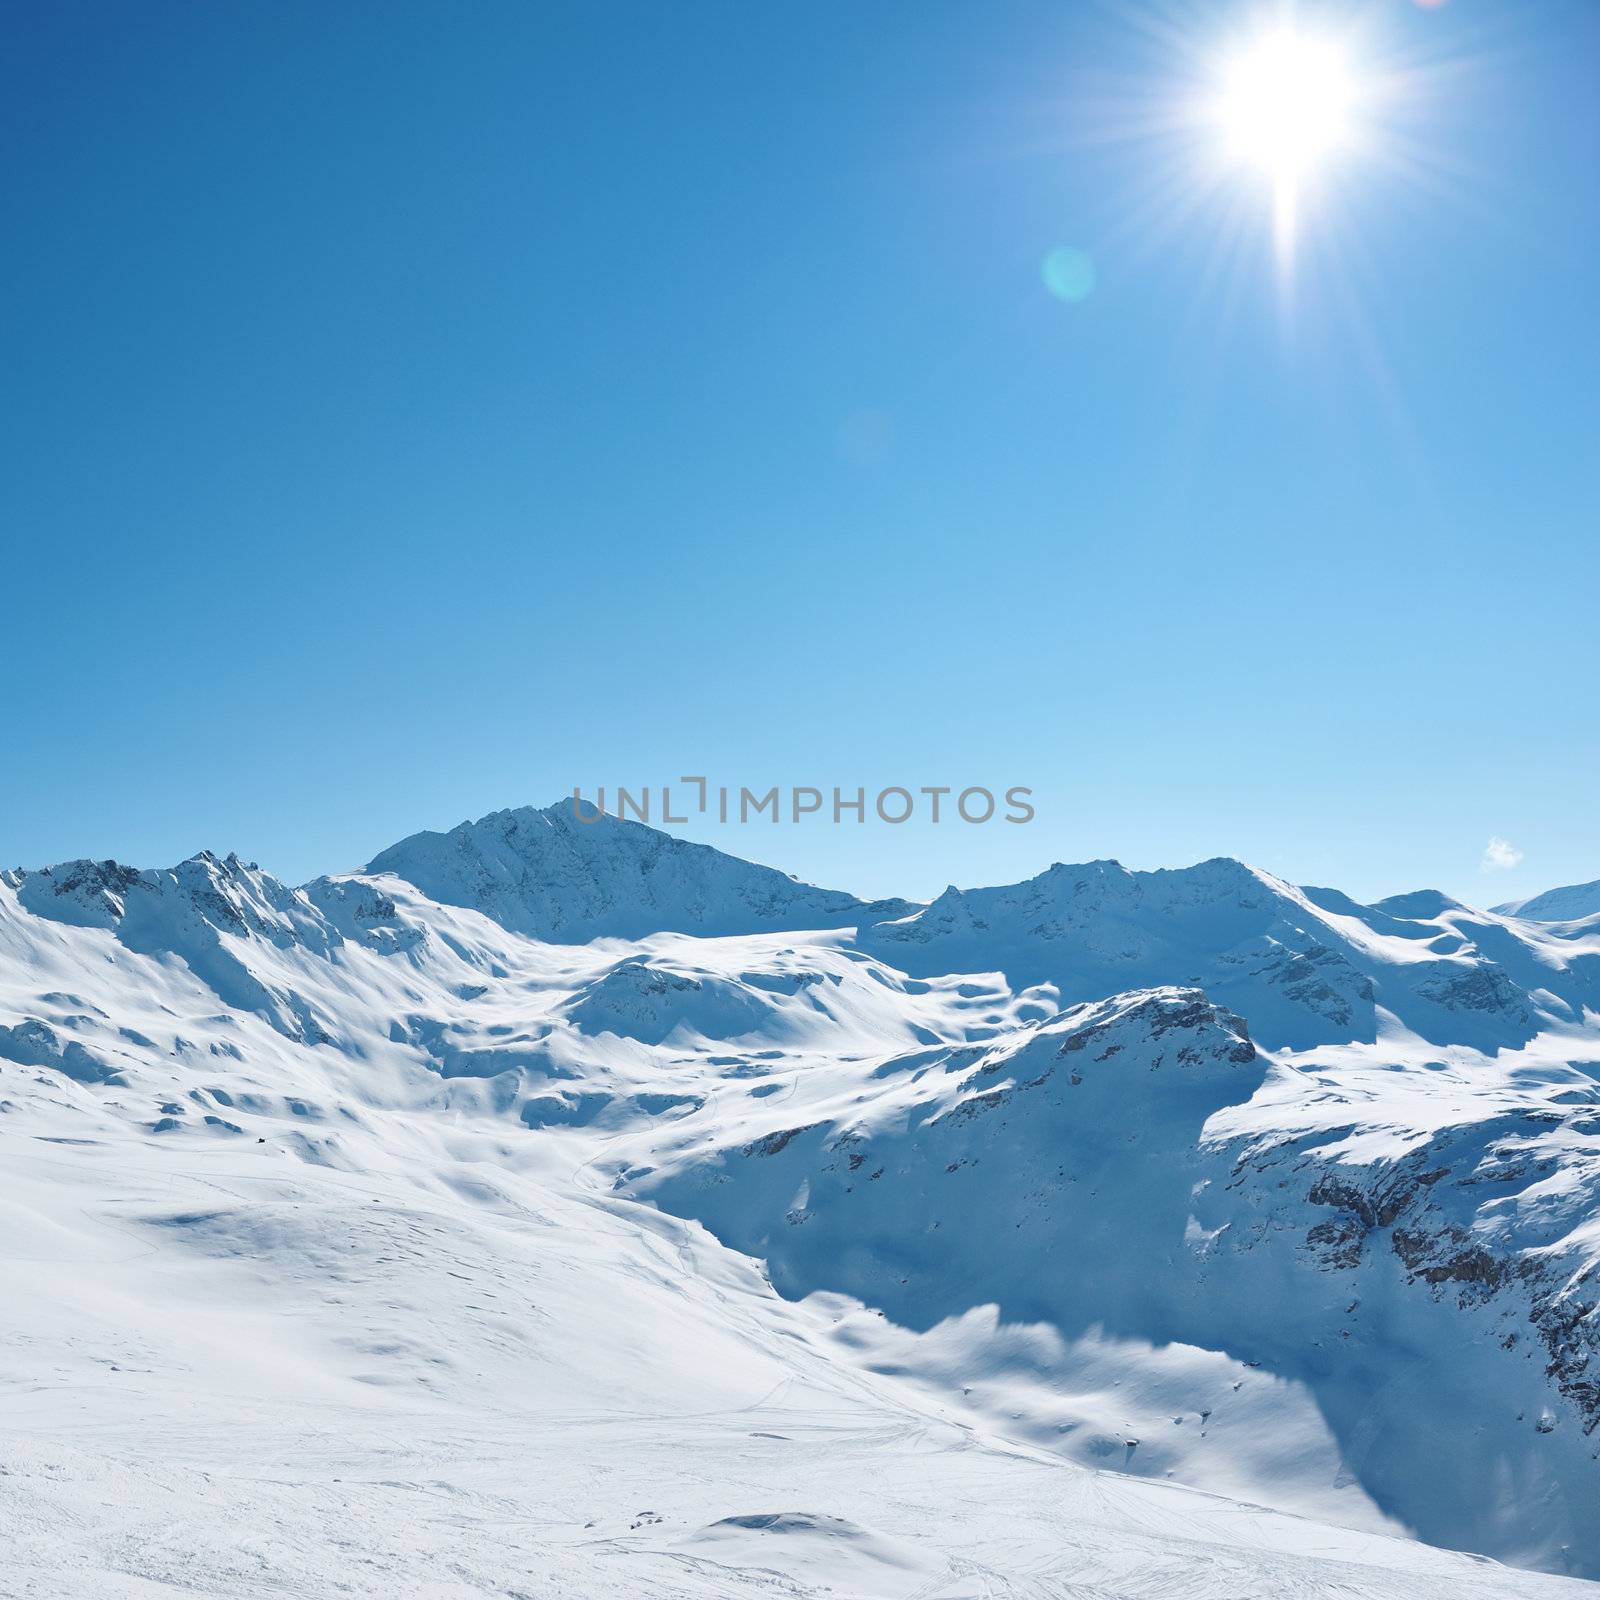 Mountains with snow in winter, Val-d'Isere, Alps, France